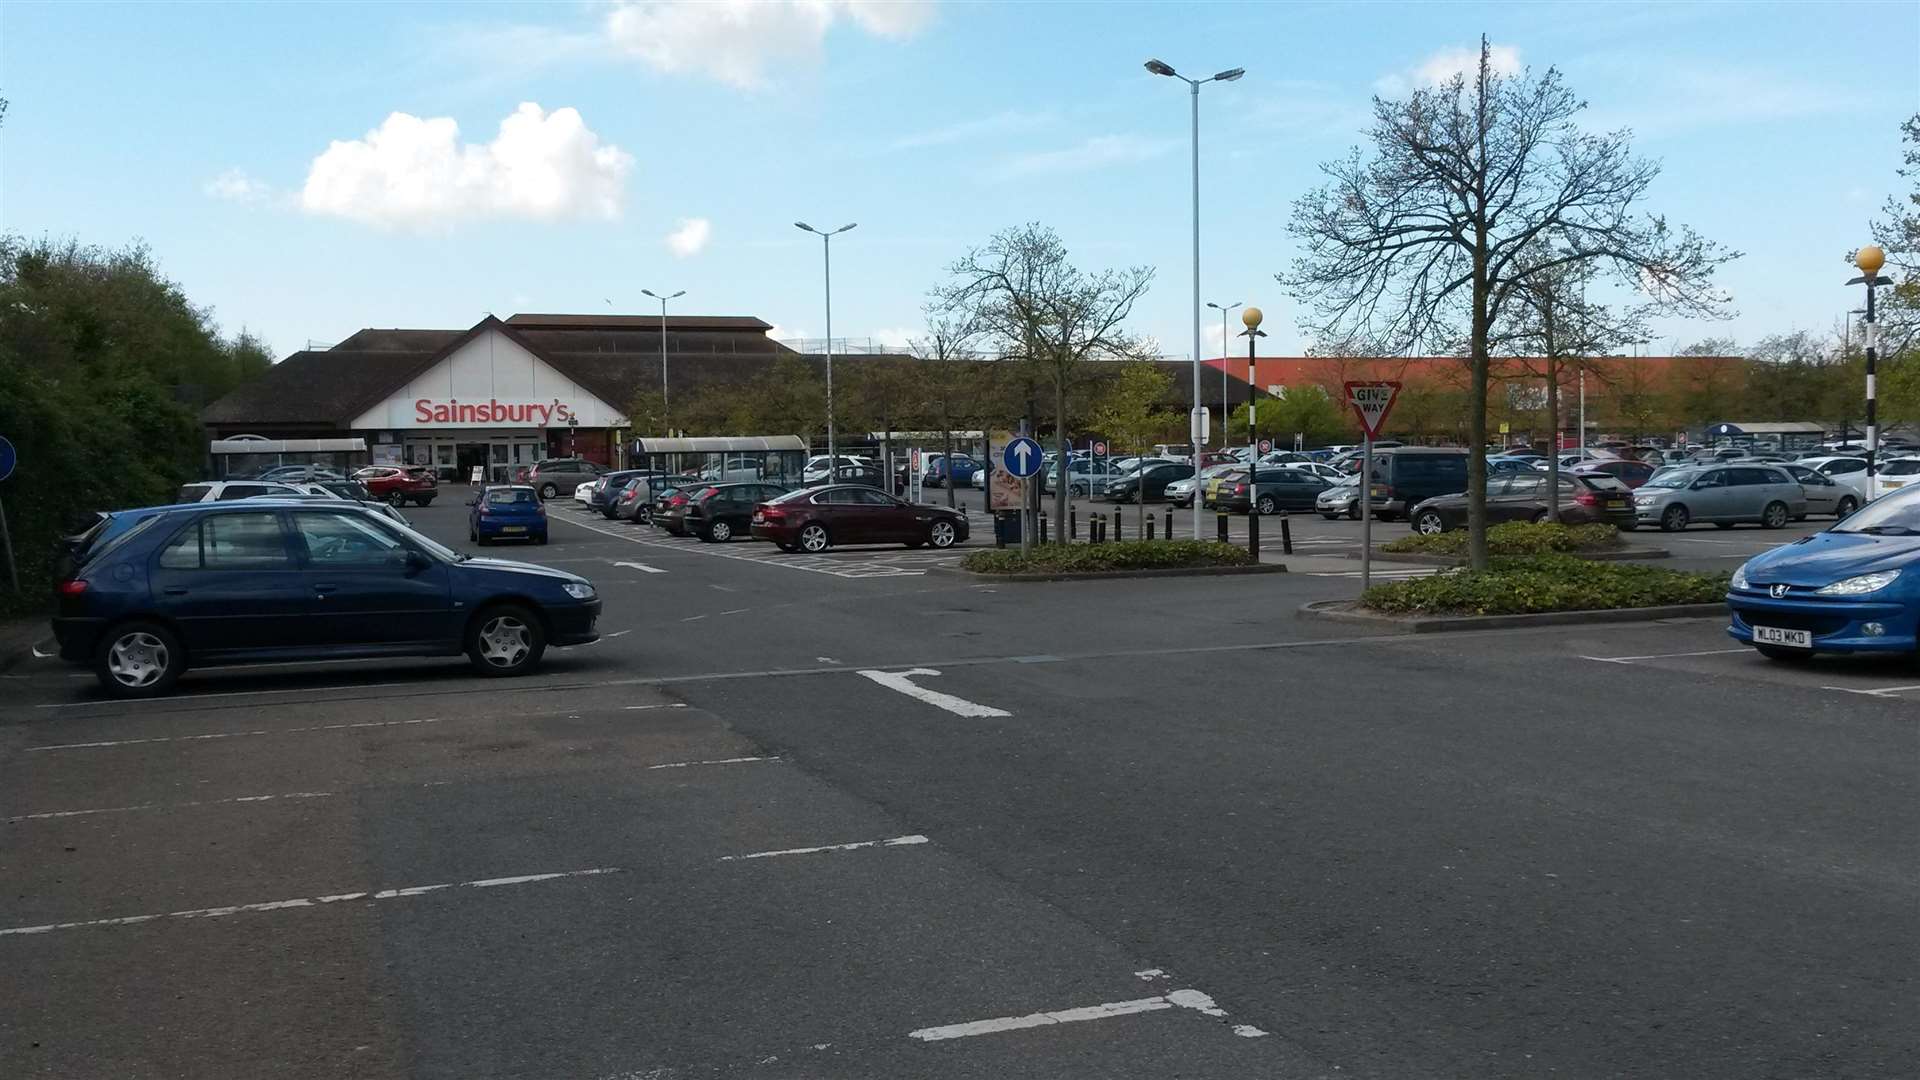 The assault happened in the car park of Sainsbury's in Chestfield